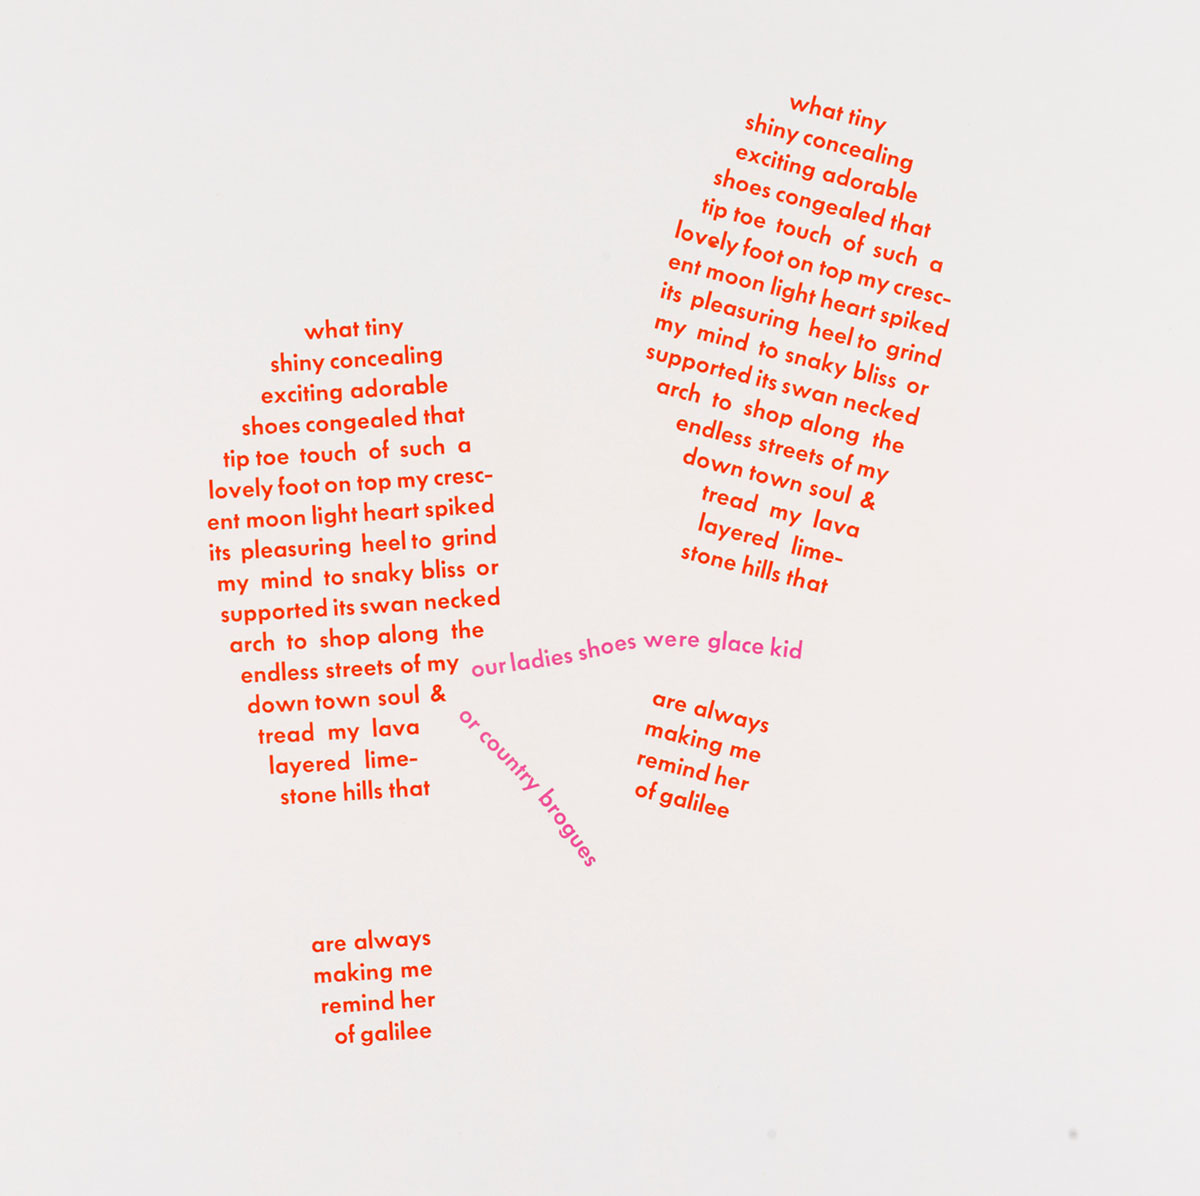 A visual poem in the shape of shoe soles